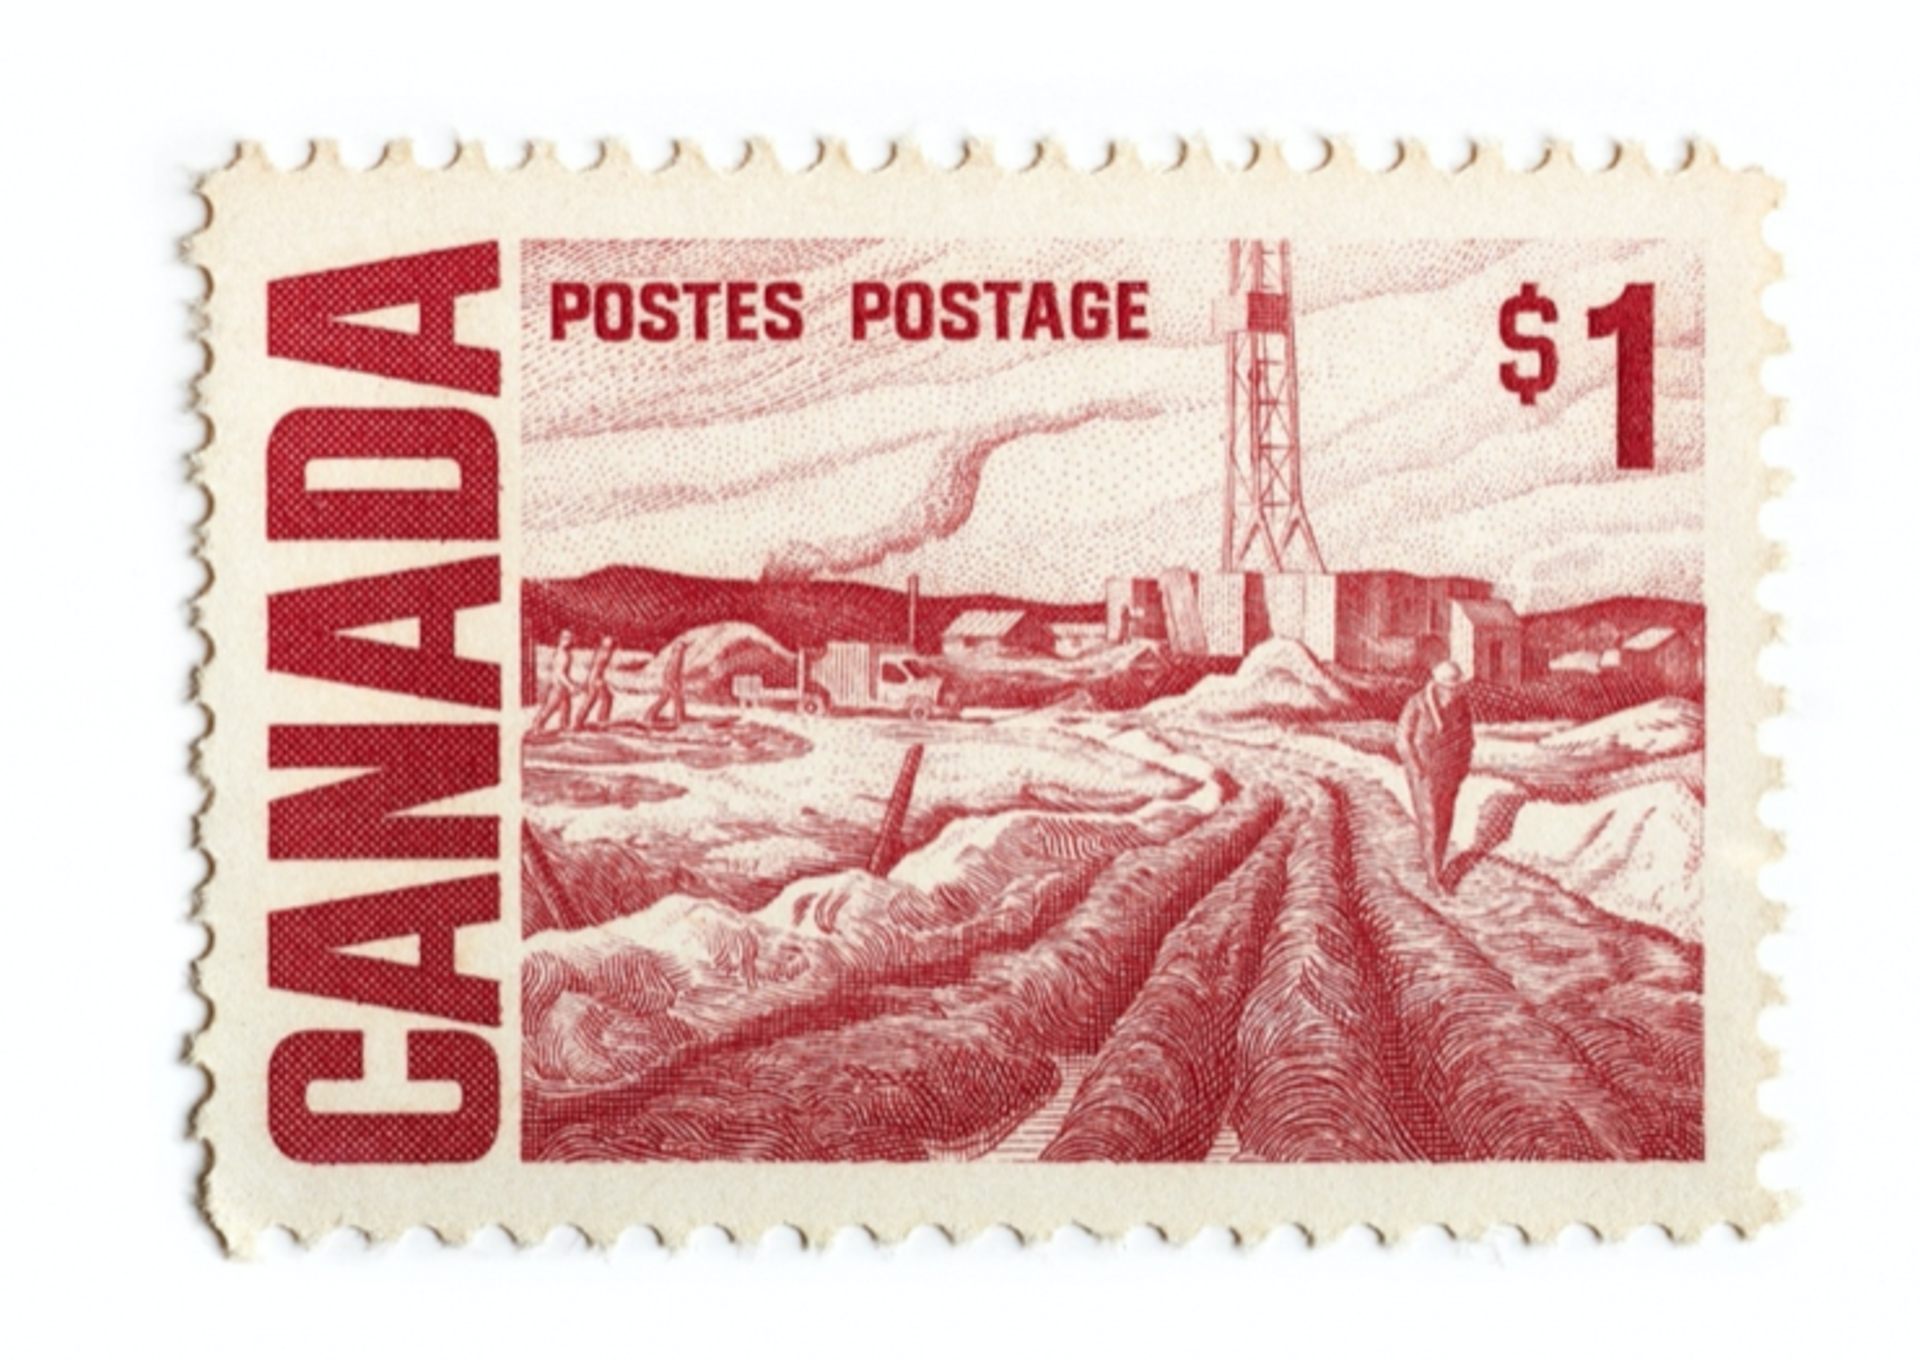 Canada Stamp 1 Dollar by Peter Andrew Lusztyk | Collectibles